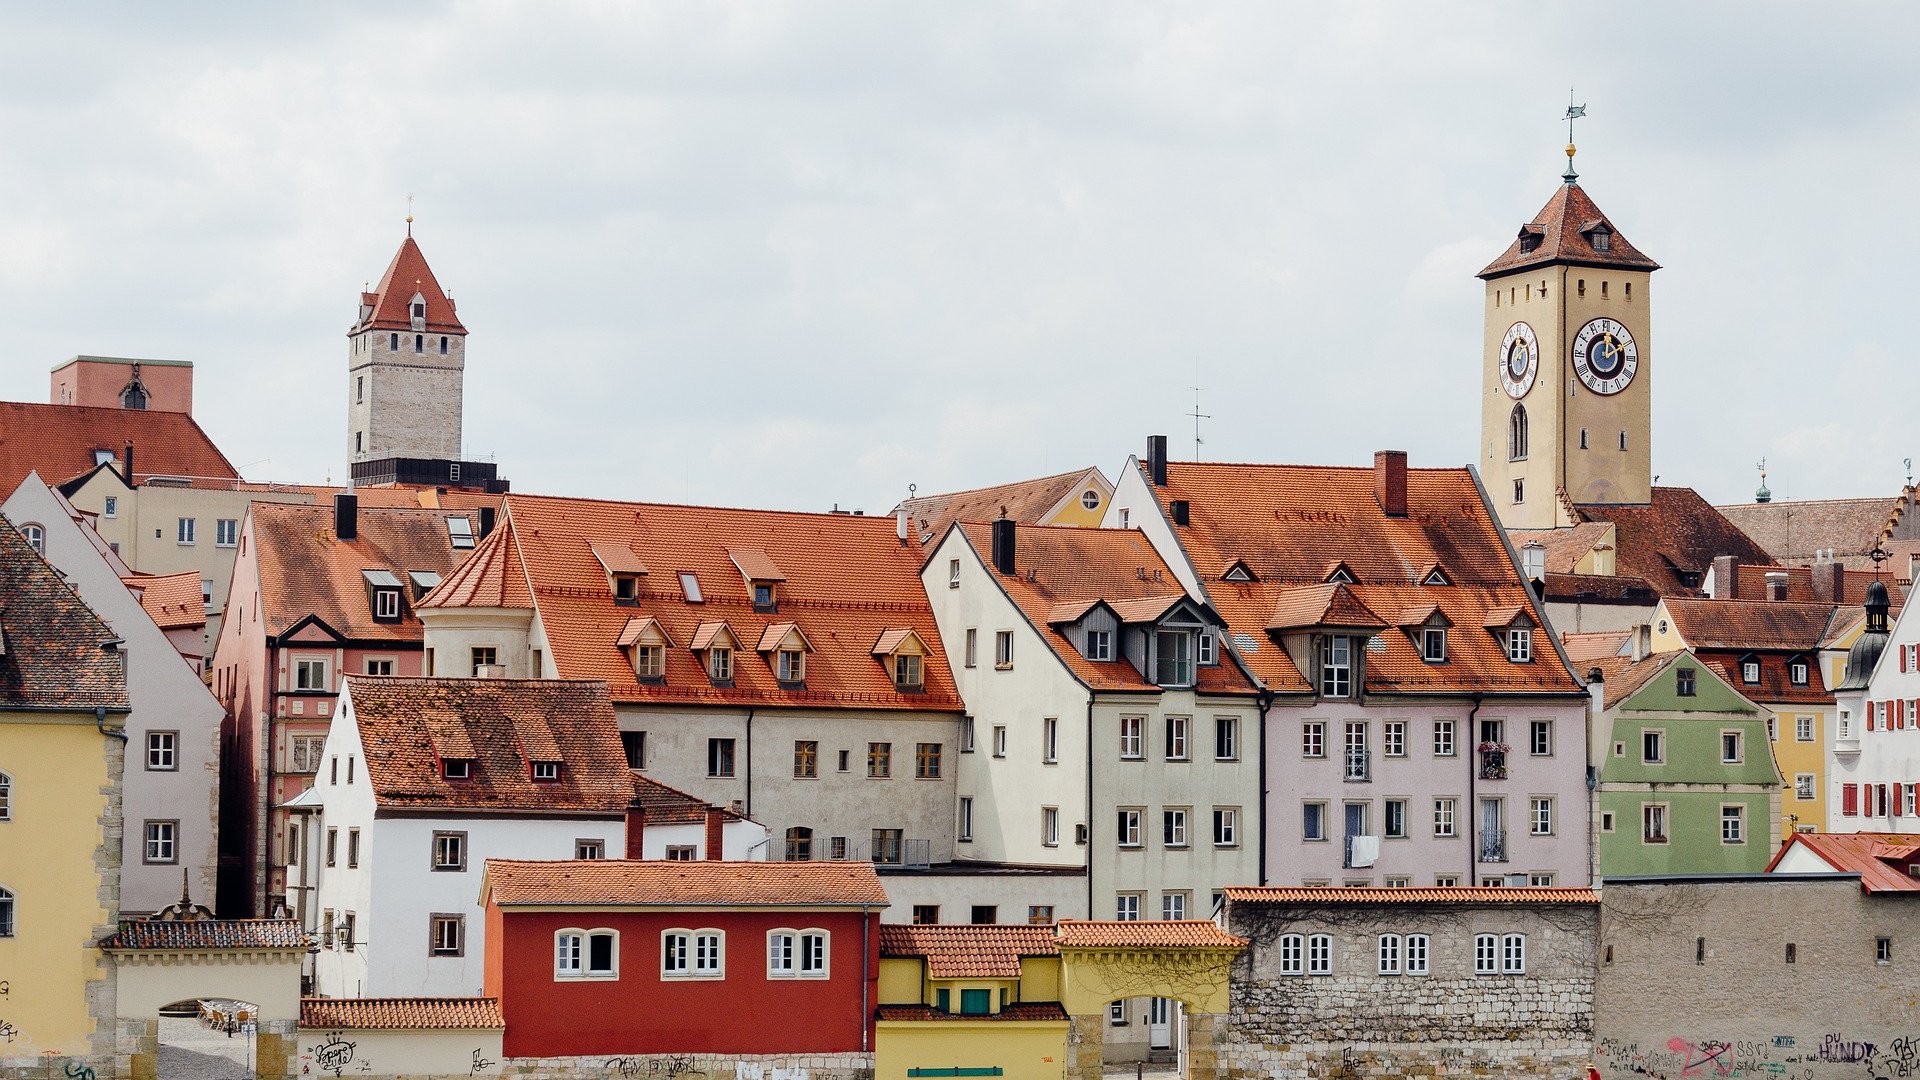 Hotels in Regensburg and its surroundings: culturally rich!